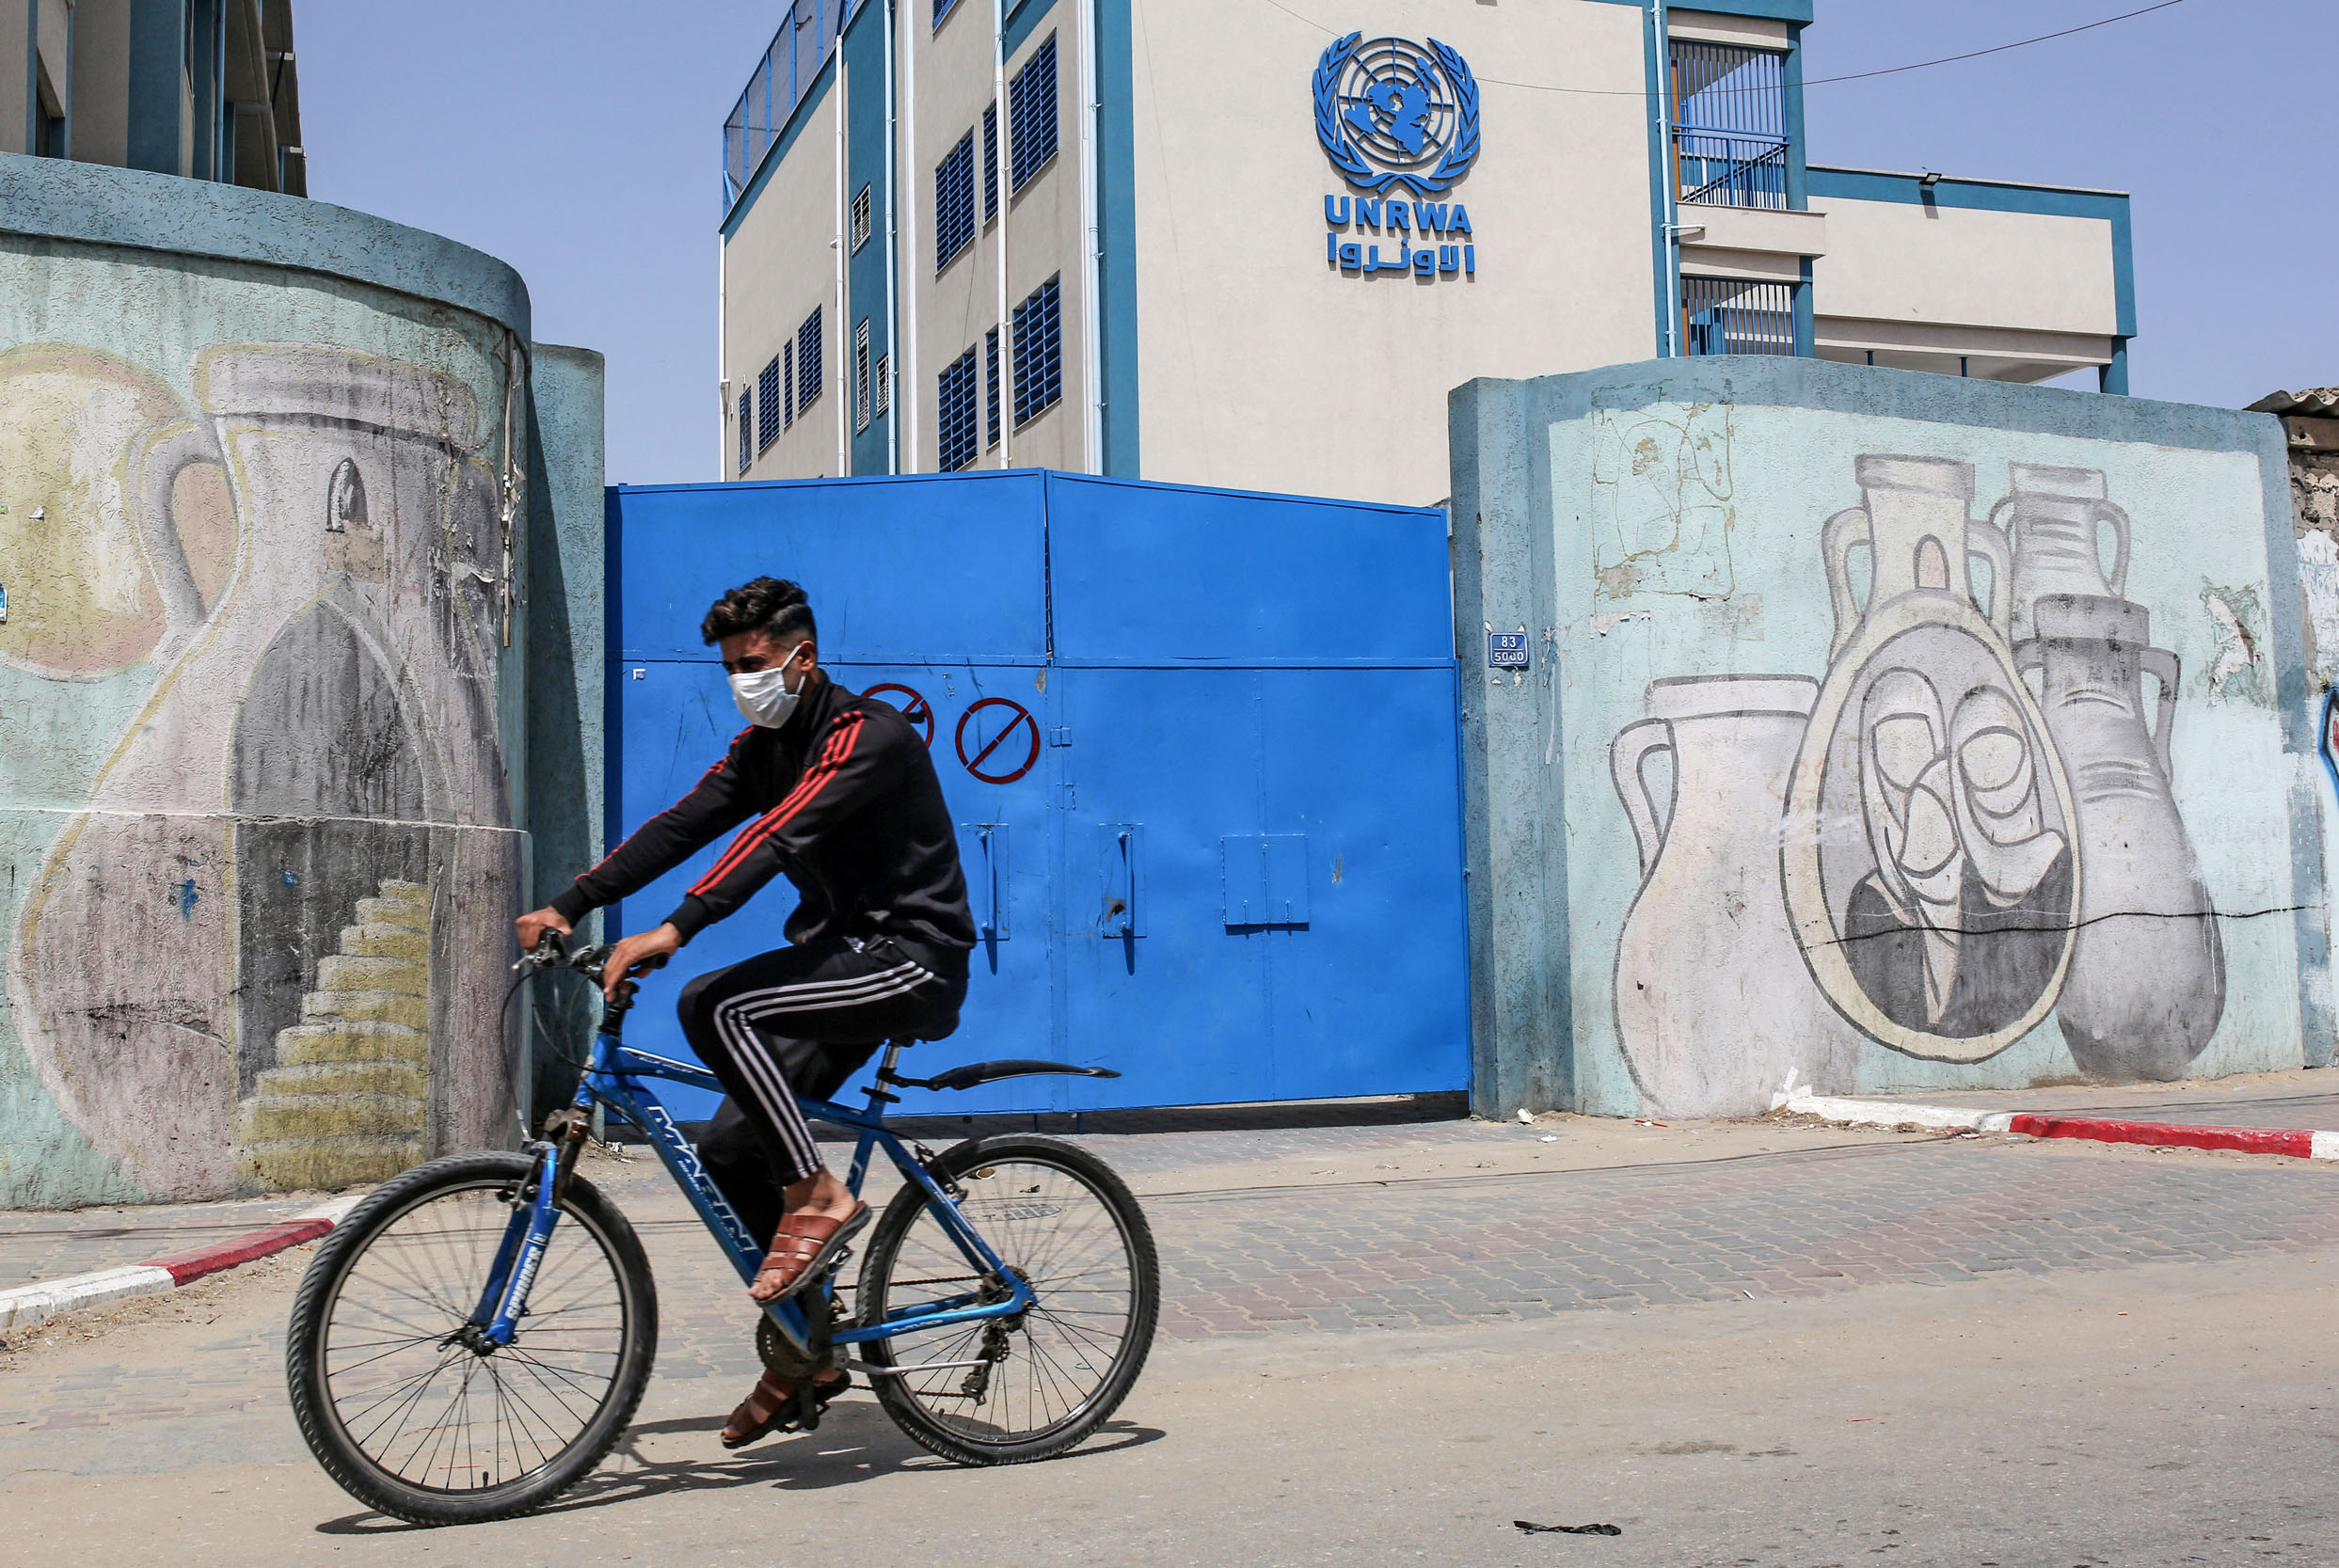 A Palestinian rides a bicycle past the closed gate of a school run by the United Nations Relief and Works Agency for Palestinian Refugees (UNRWA) in the city of Rafah in the southern Gaza Strip on April 6, 2021, amidst a lockdown due to the COVID-19 coronavirus pandemic. (Photo by SAID KHATIB / AFP)